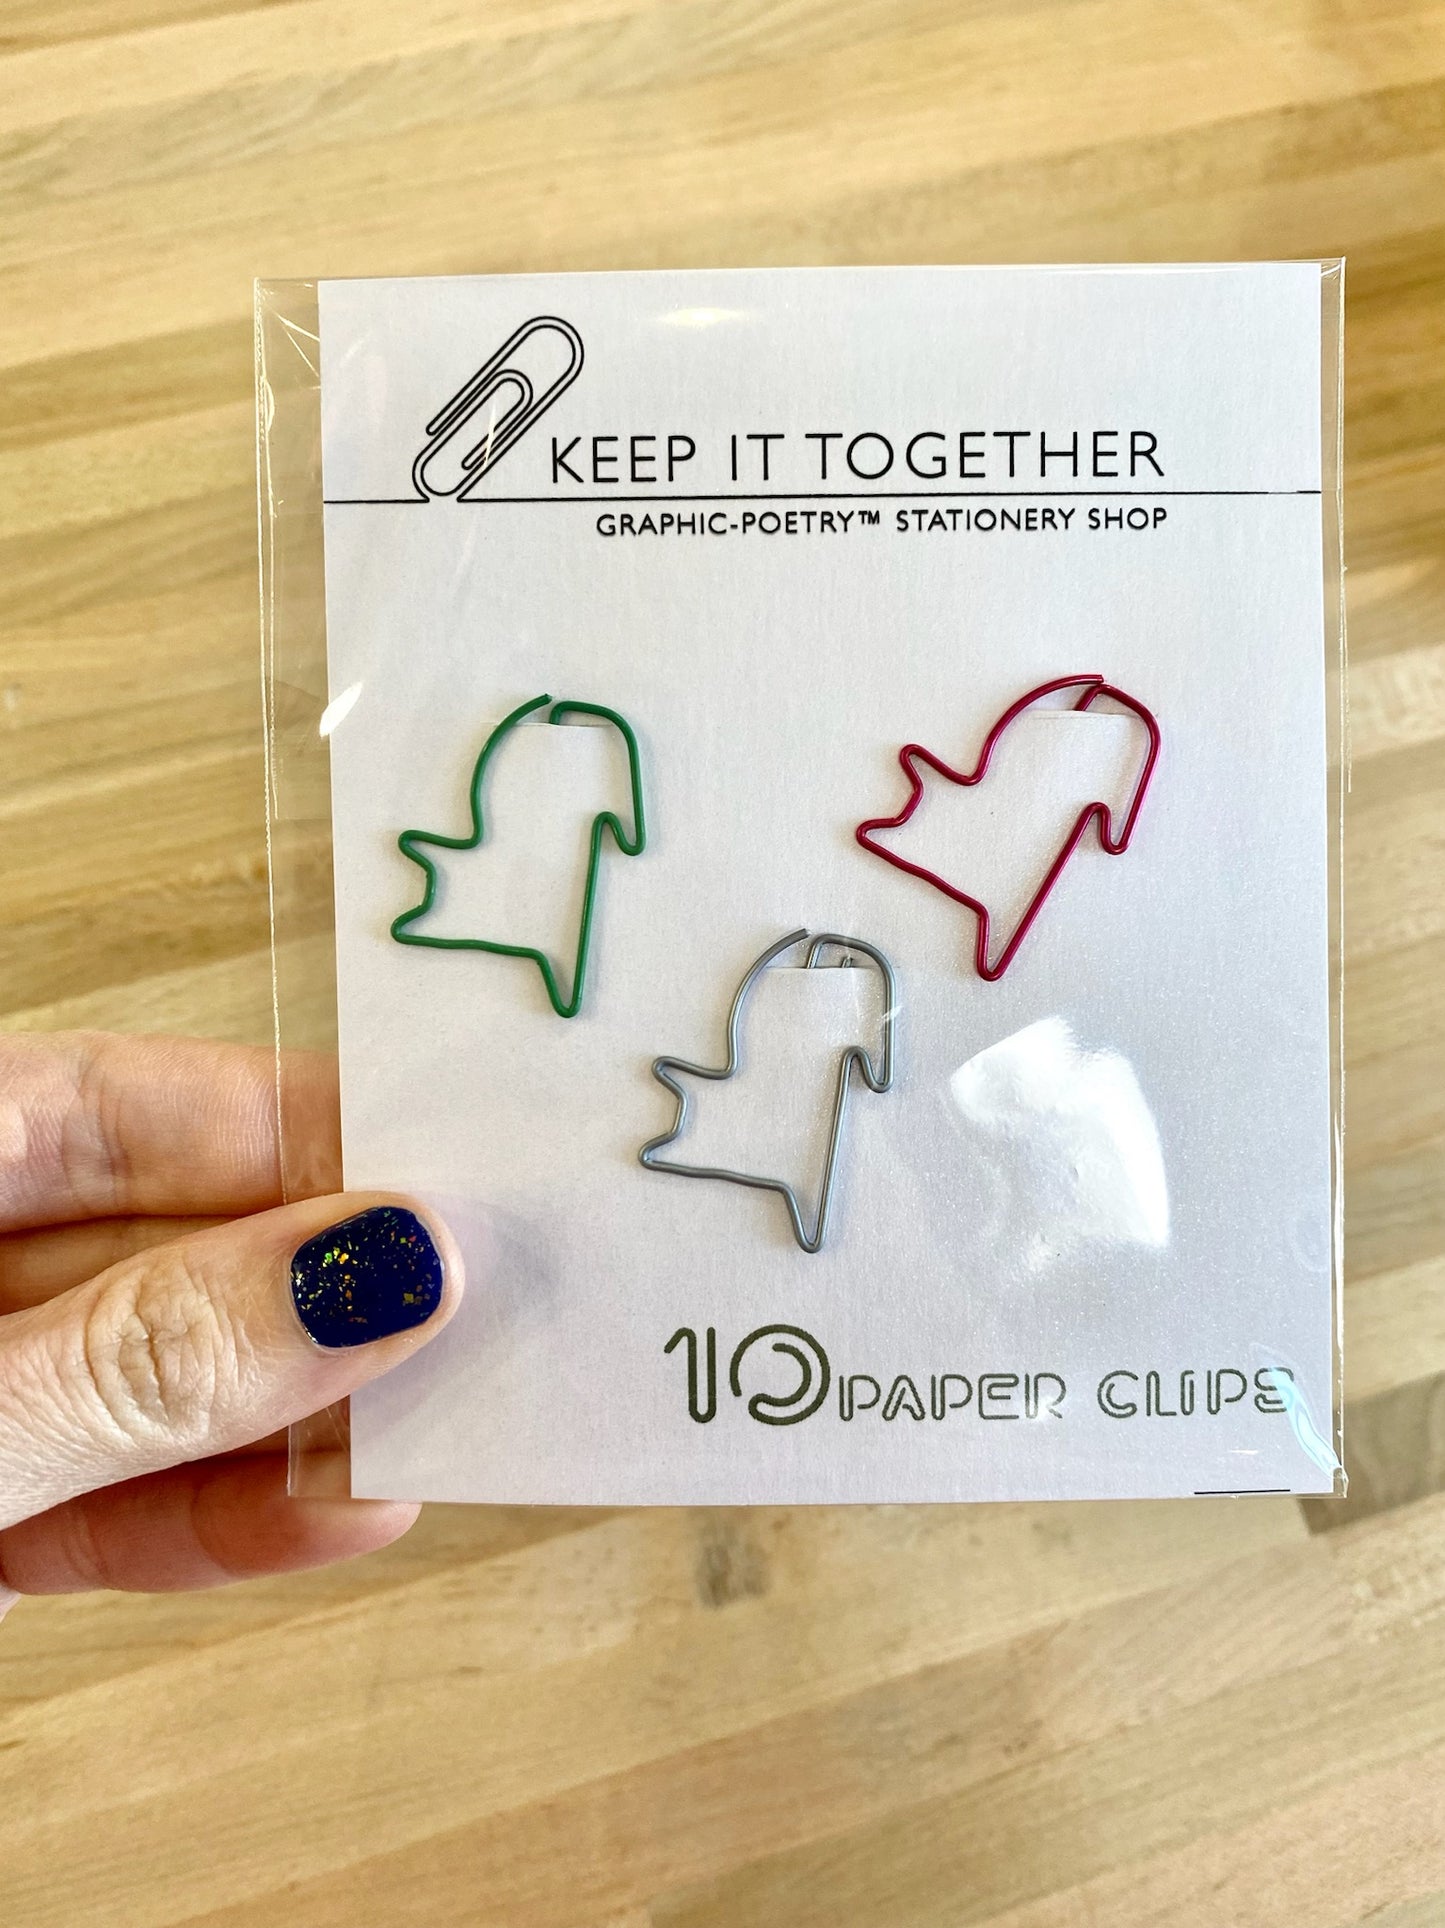 Cat Paperclips